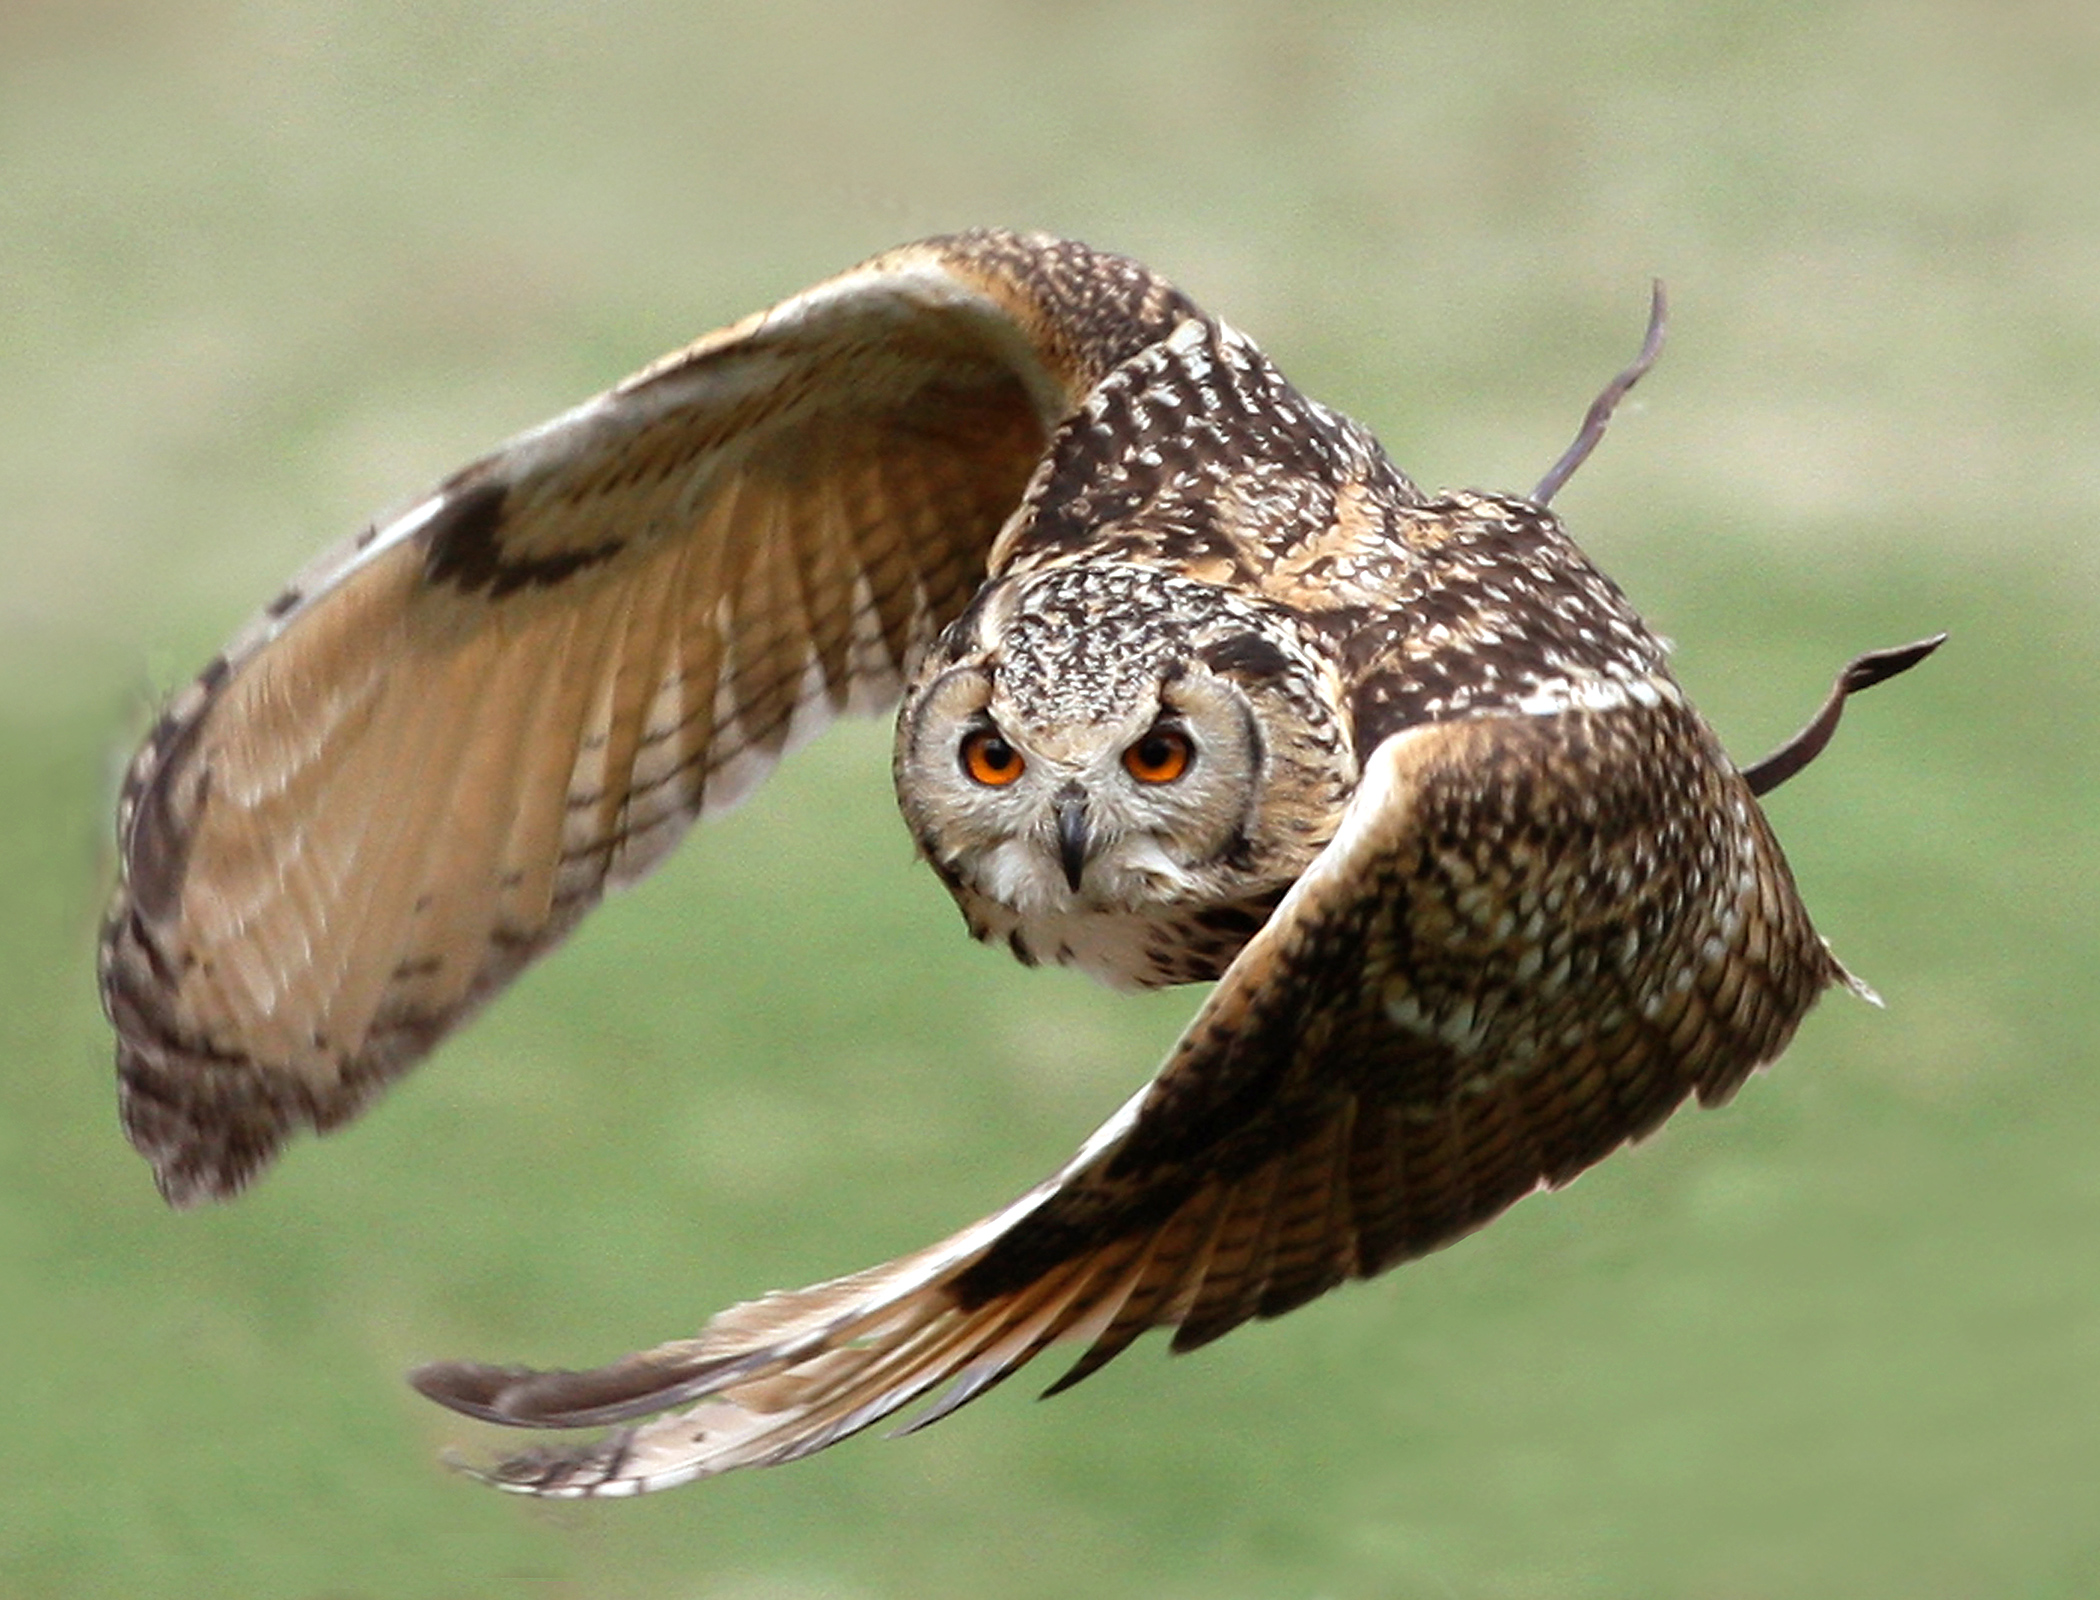 Aircraft noise pollution could be dampened with design based on owl wings